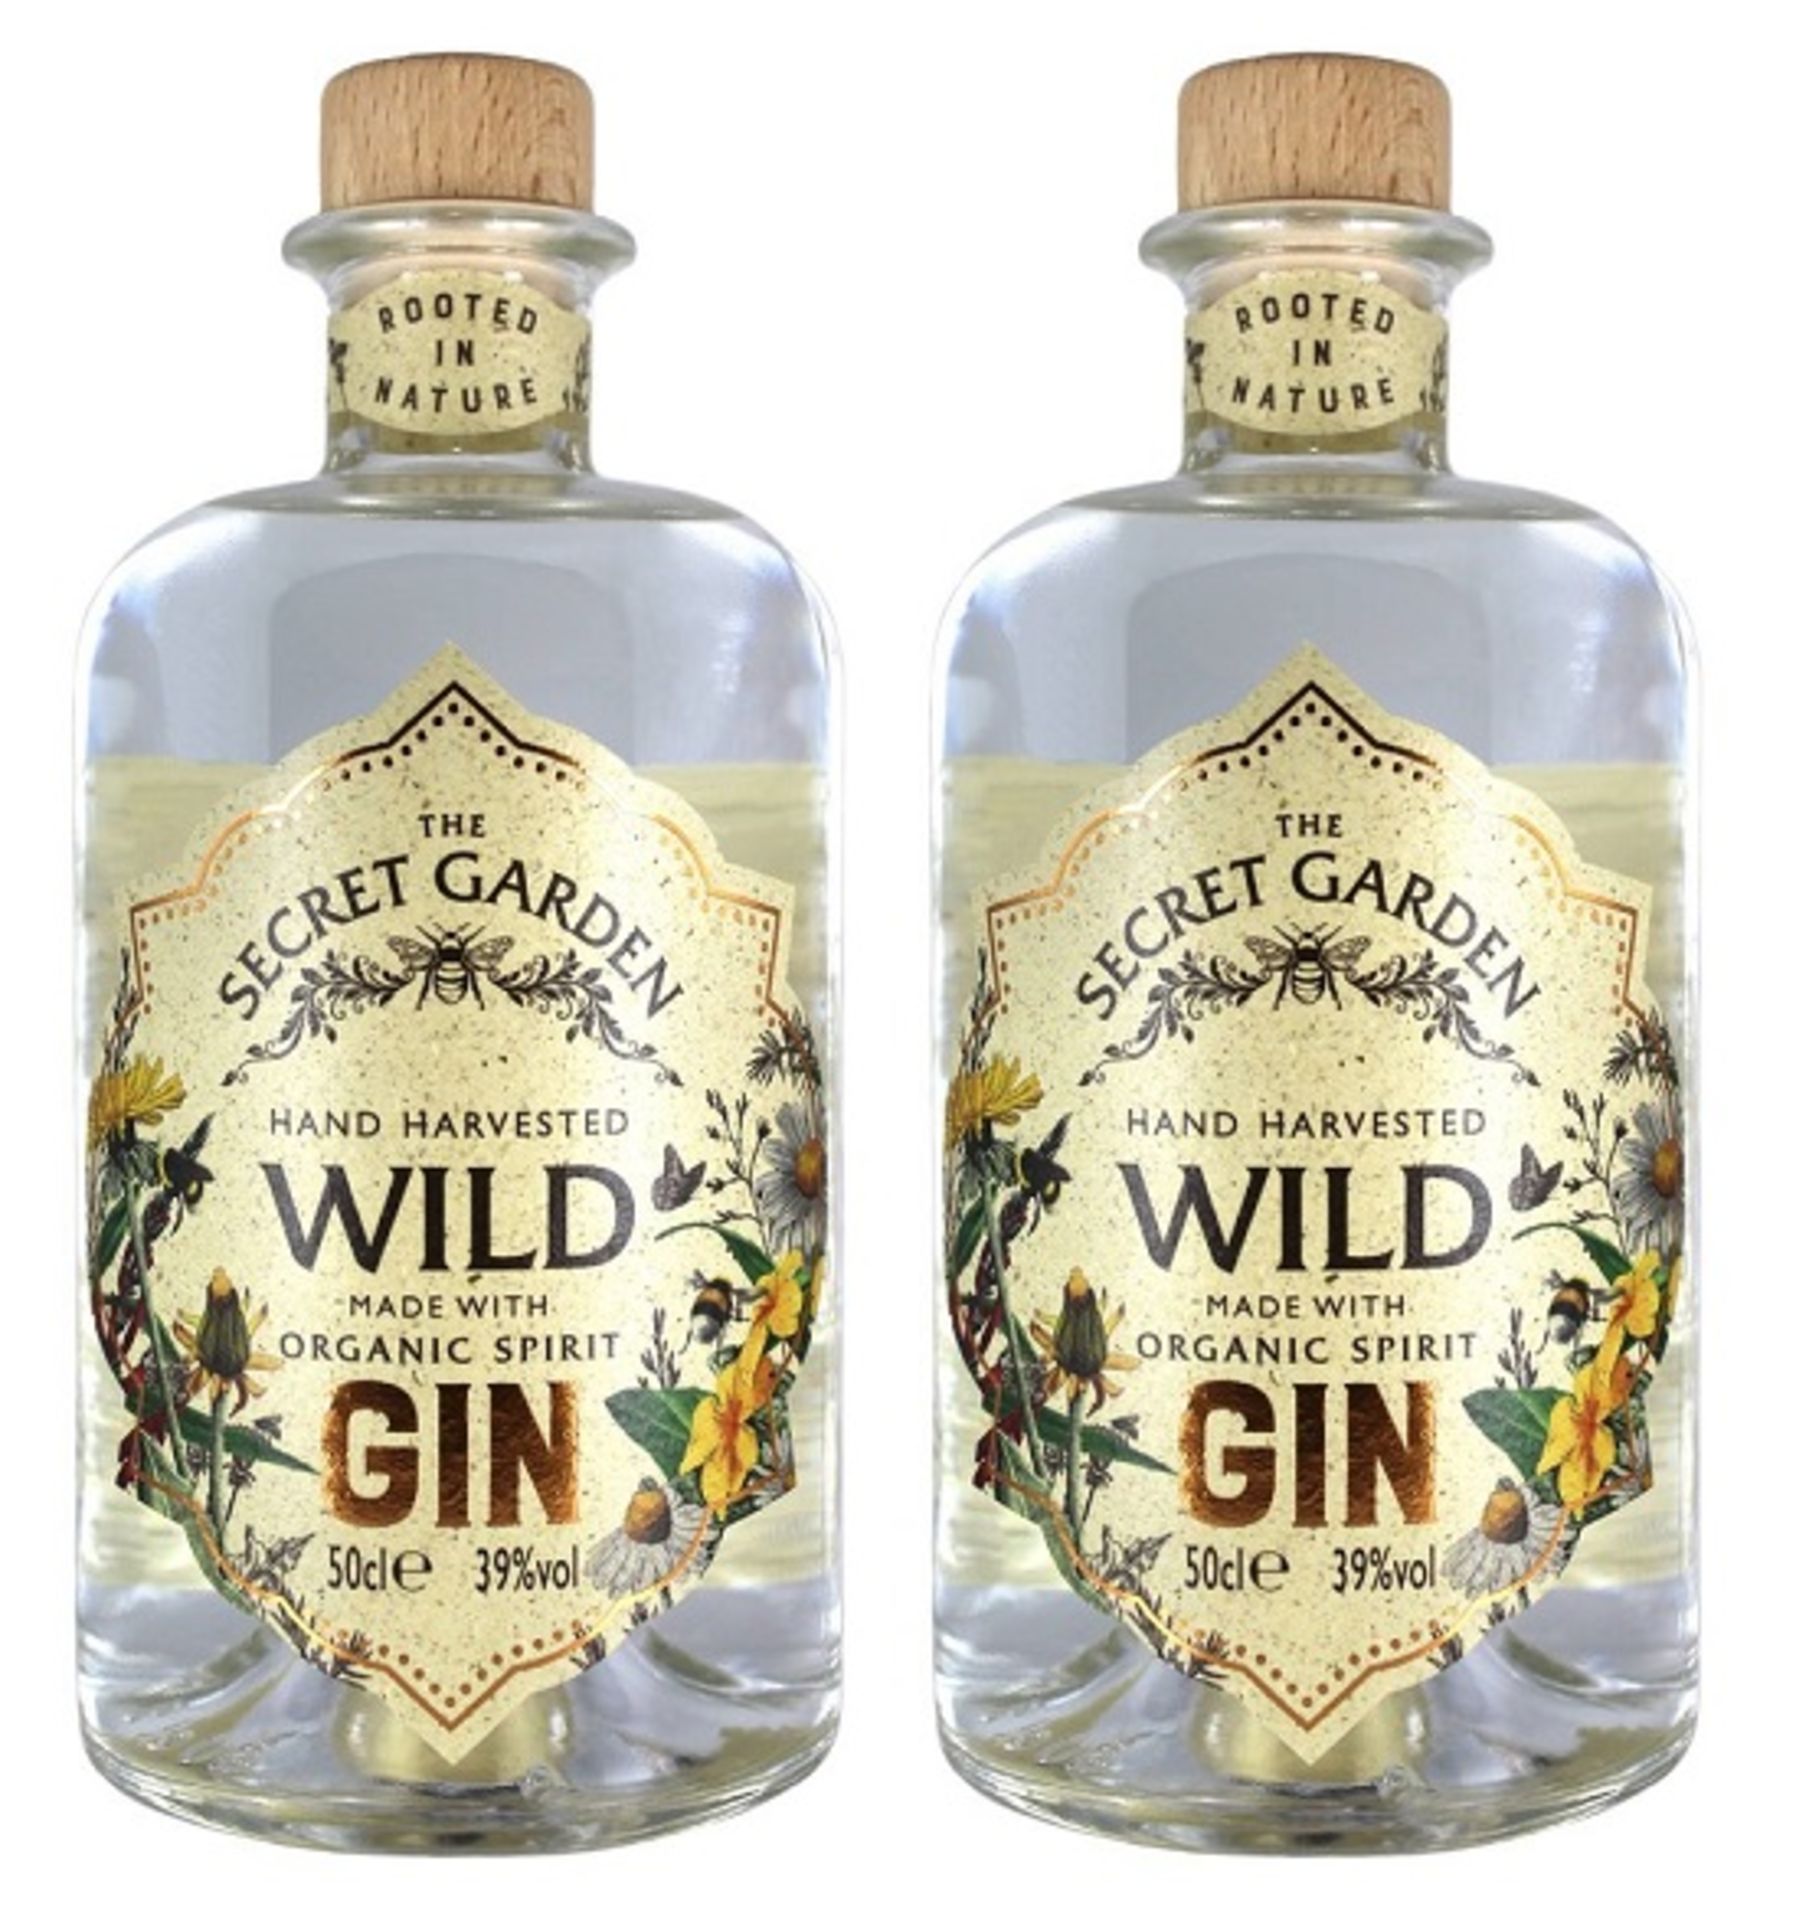 2 x Bottles of The Secret Garden Hand Harvested Wild Gin - 50cl 39% - New and Sealed - RRP £72 -